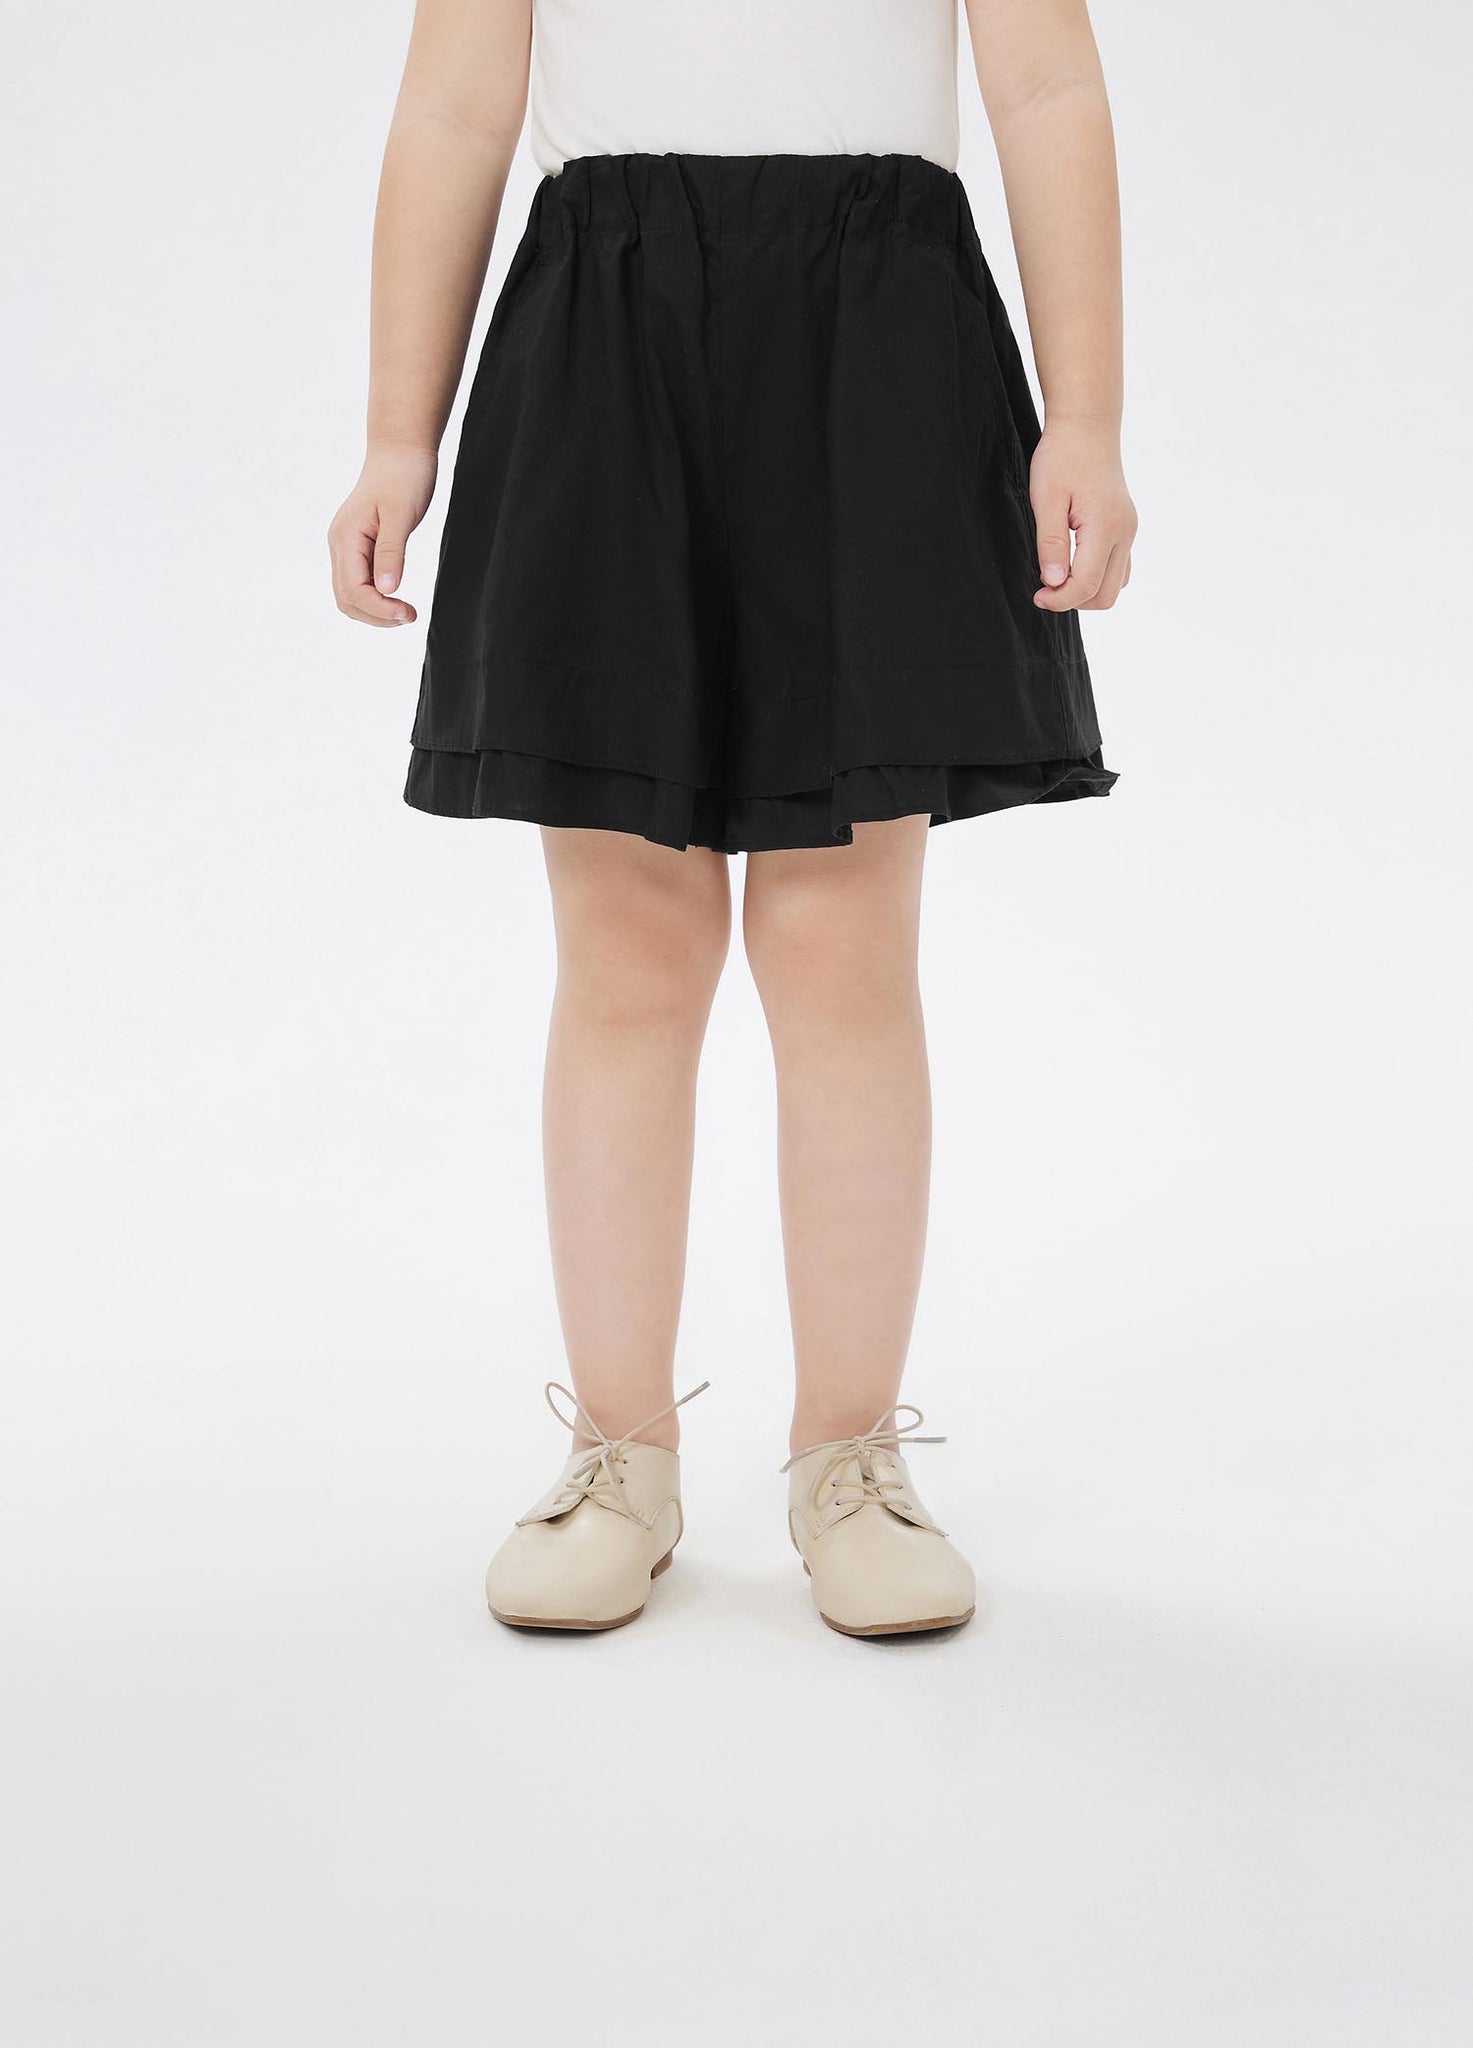 Shorts / jnby by JNBY Loose Fit Solid Shorts